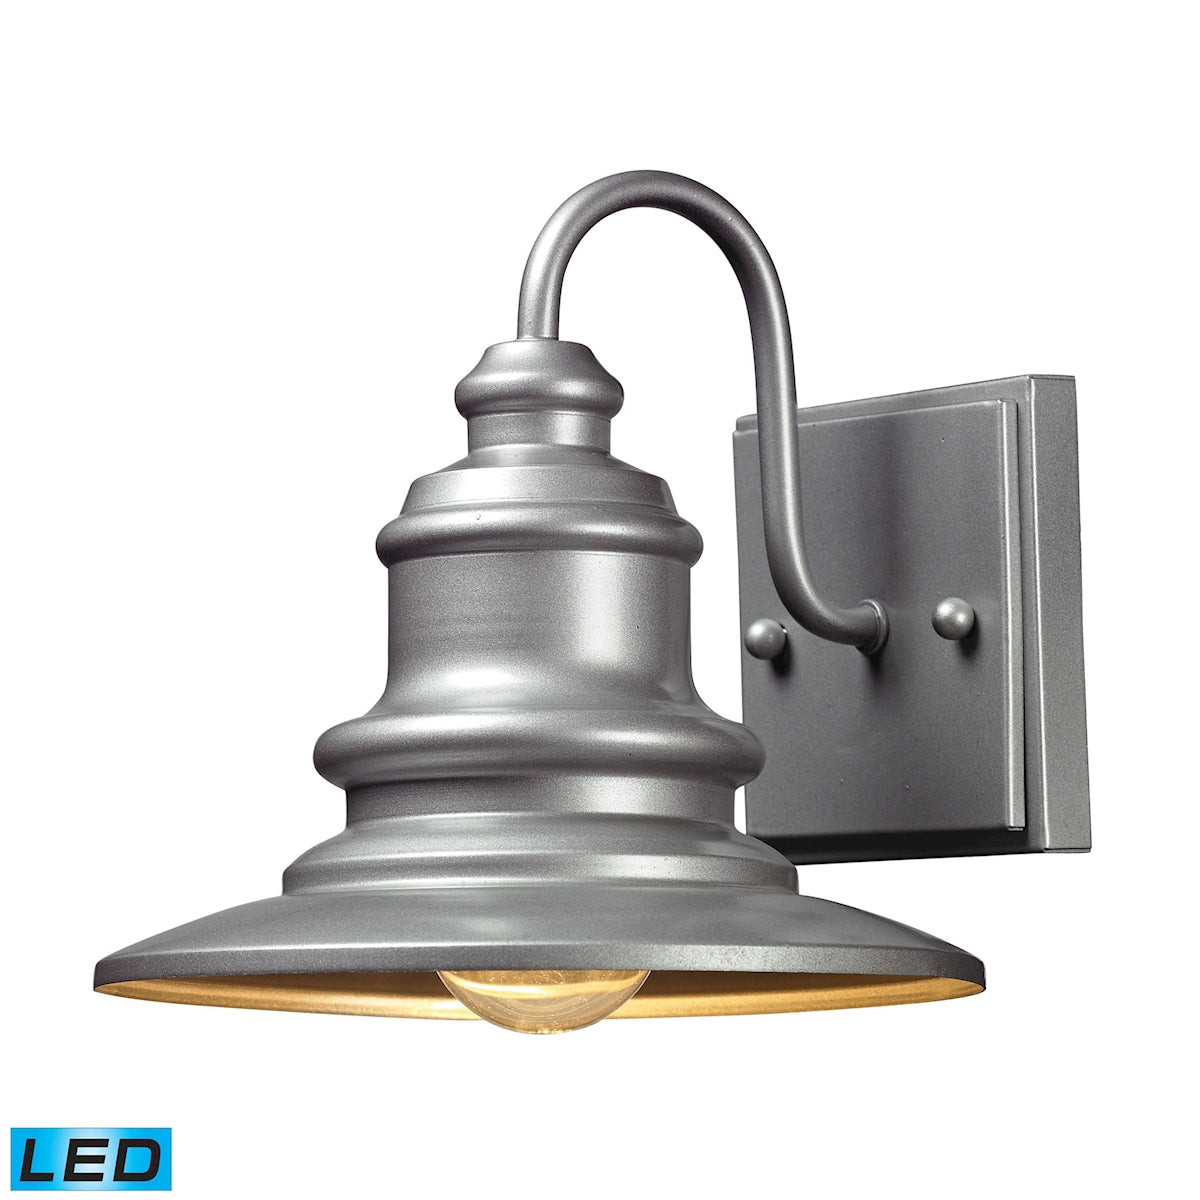 ELK Lighting 47020/1-LED Marina 1-Light Outdoor Wall Lamp in Matte Silver - Includes LED Bulb